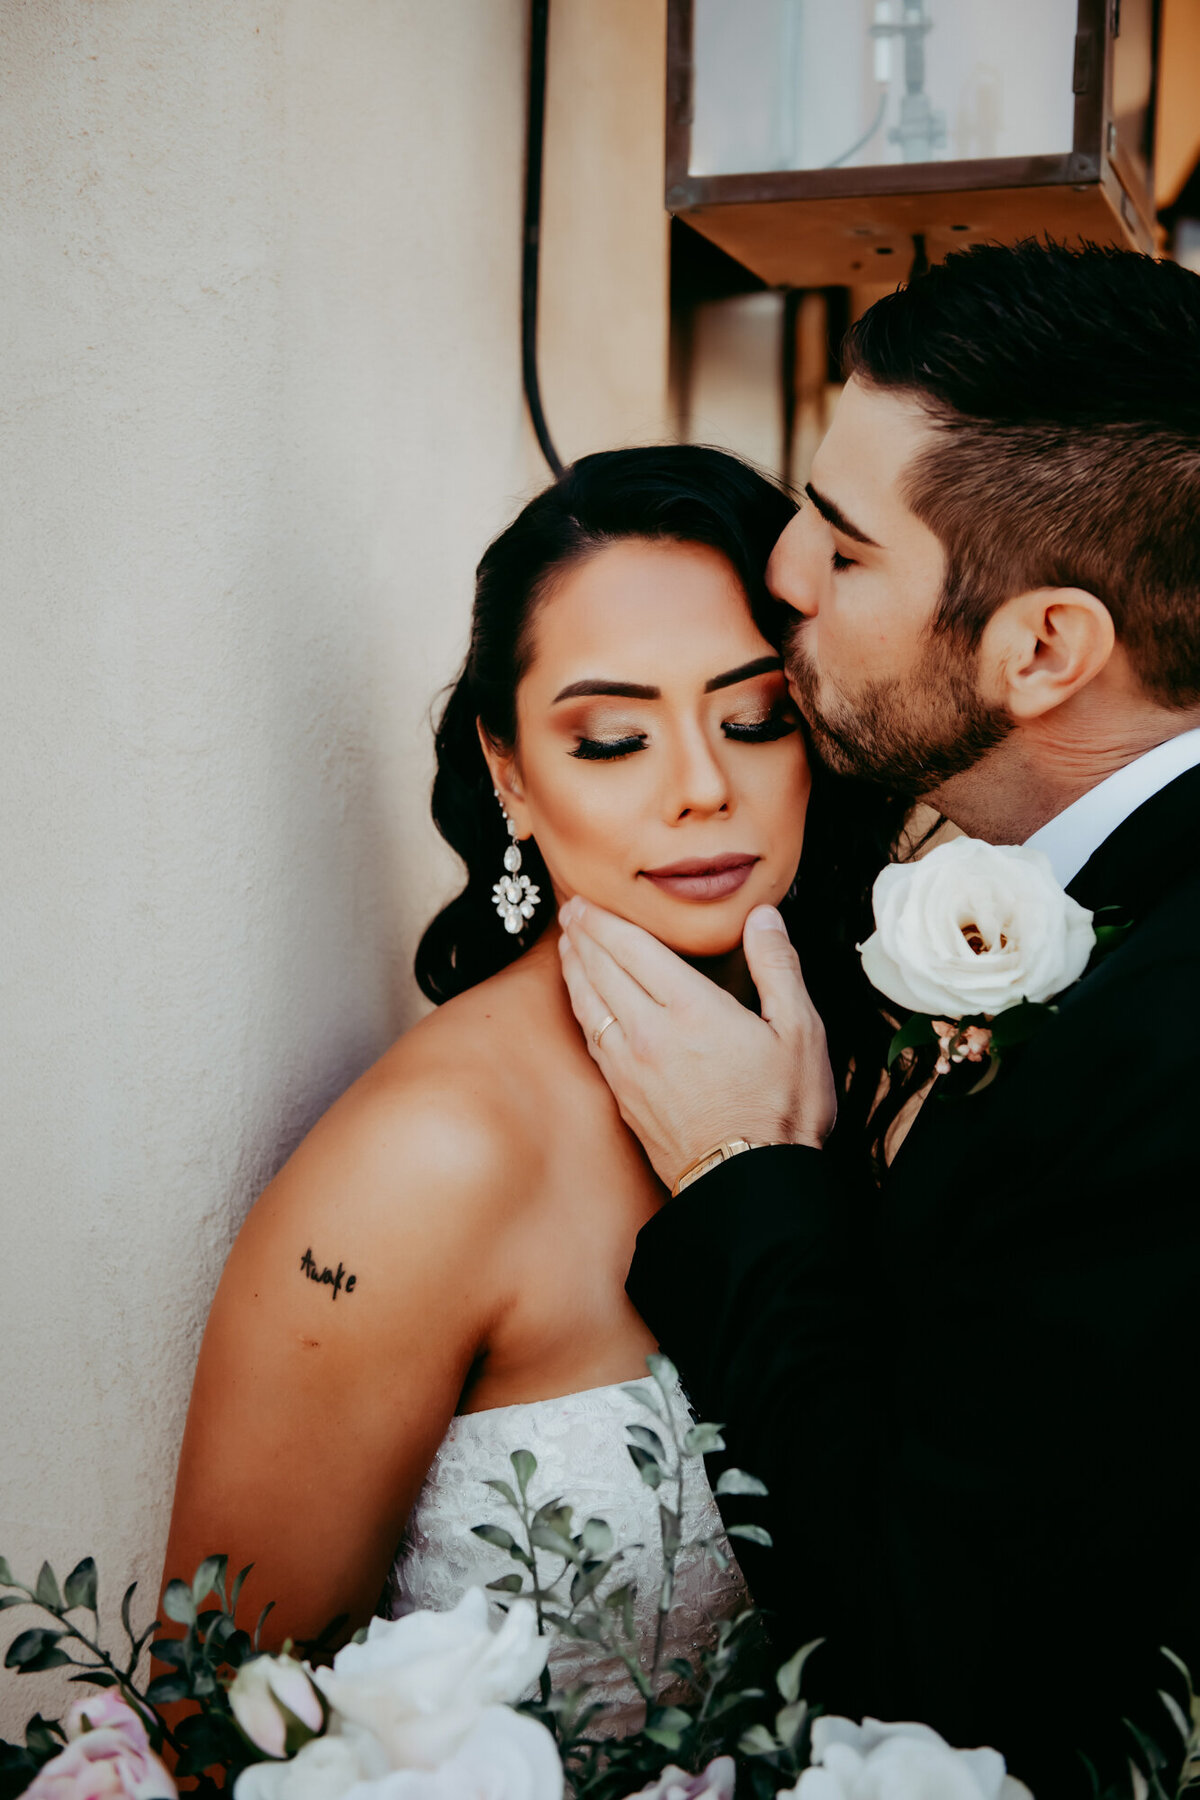 Couples Photography, Groom kisses bride on side of face as she affectionately accepts with eyes closed